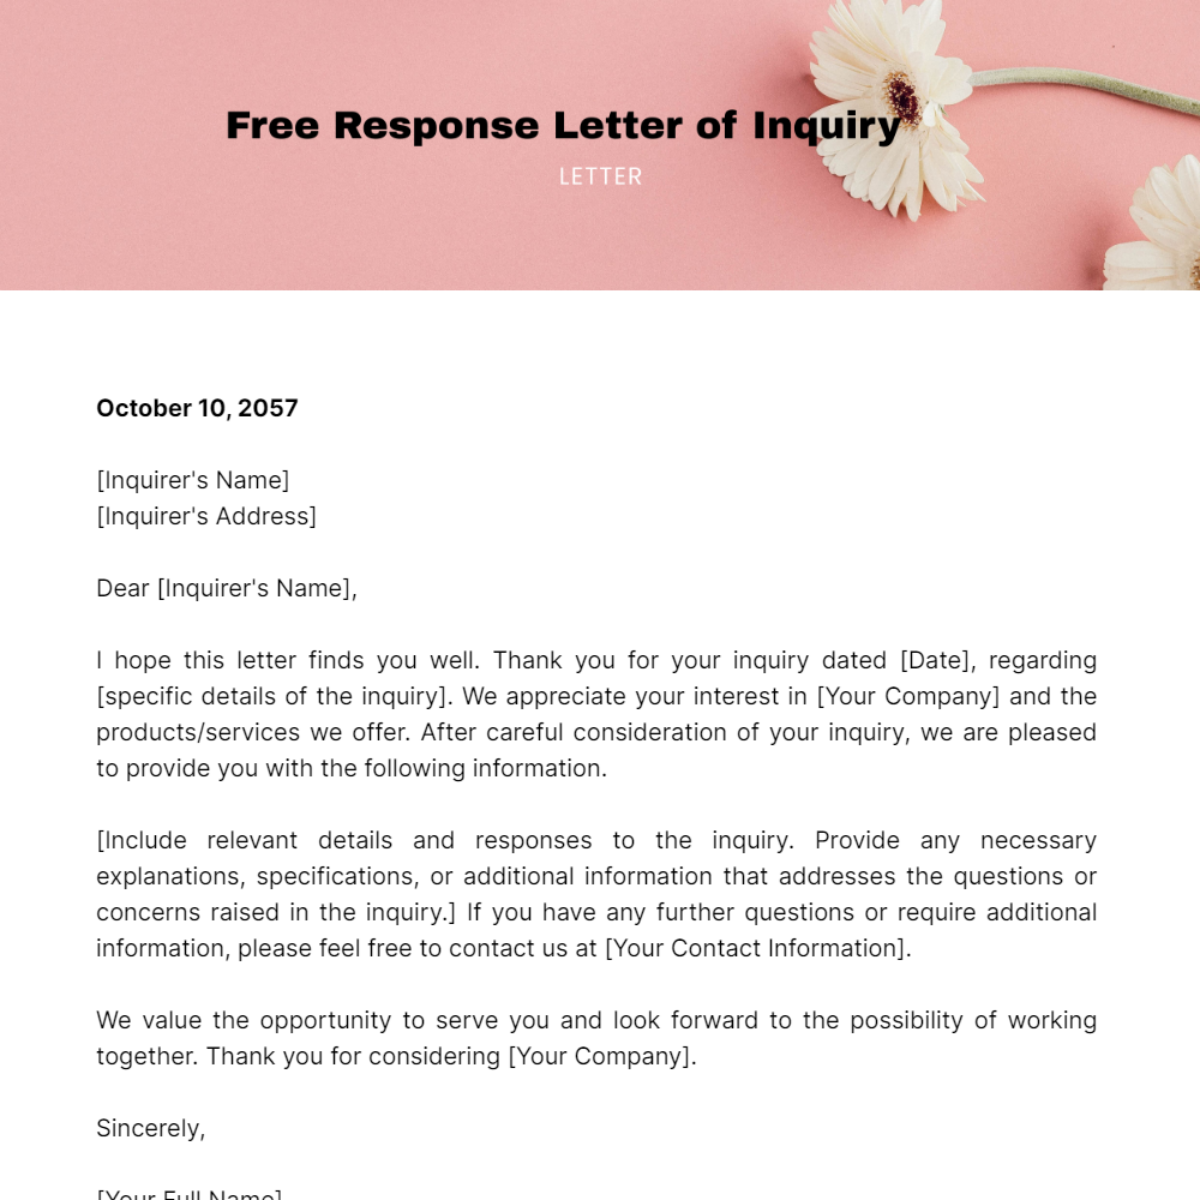 Free Response Letter of Inquiry